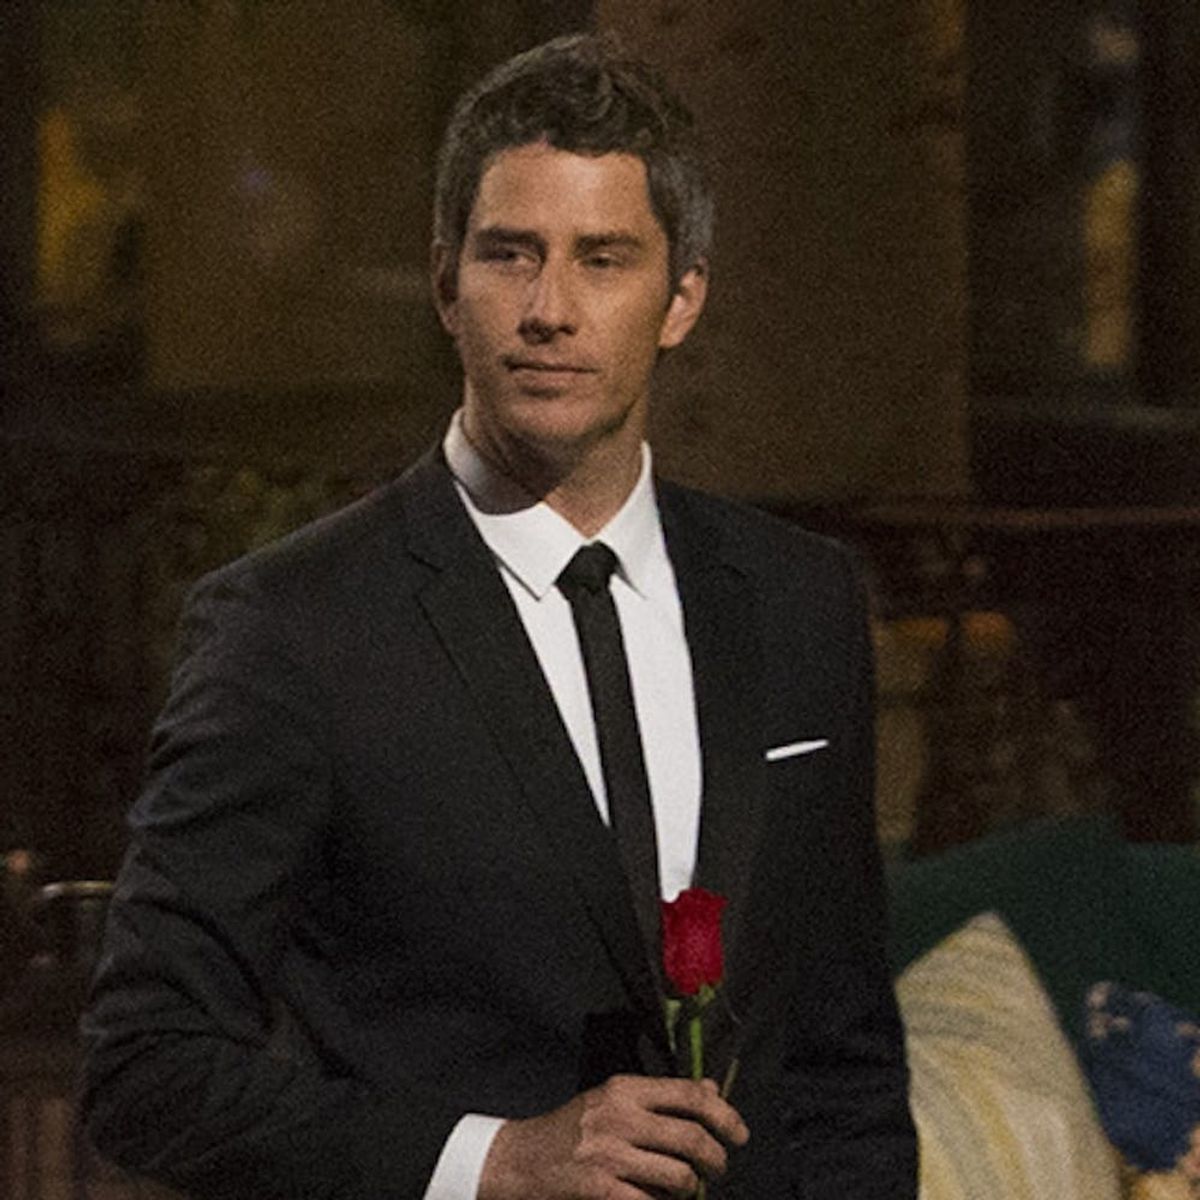 The Bachelor’s Arie Luyendyk Jr. Created a Spotify Playlist About His Journey to Find Love